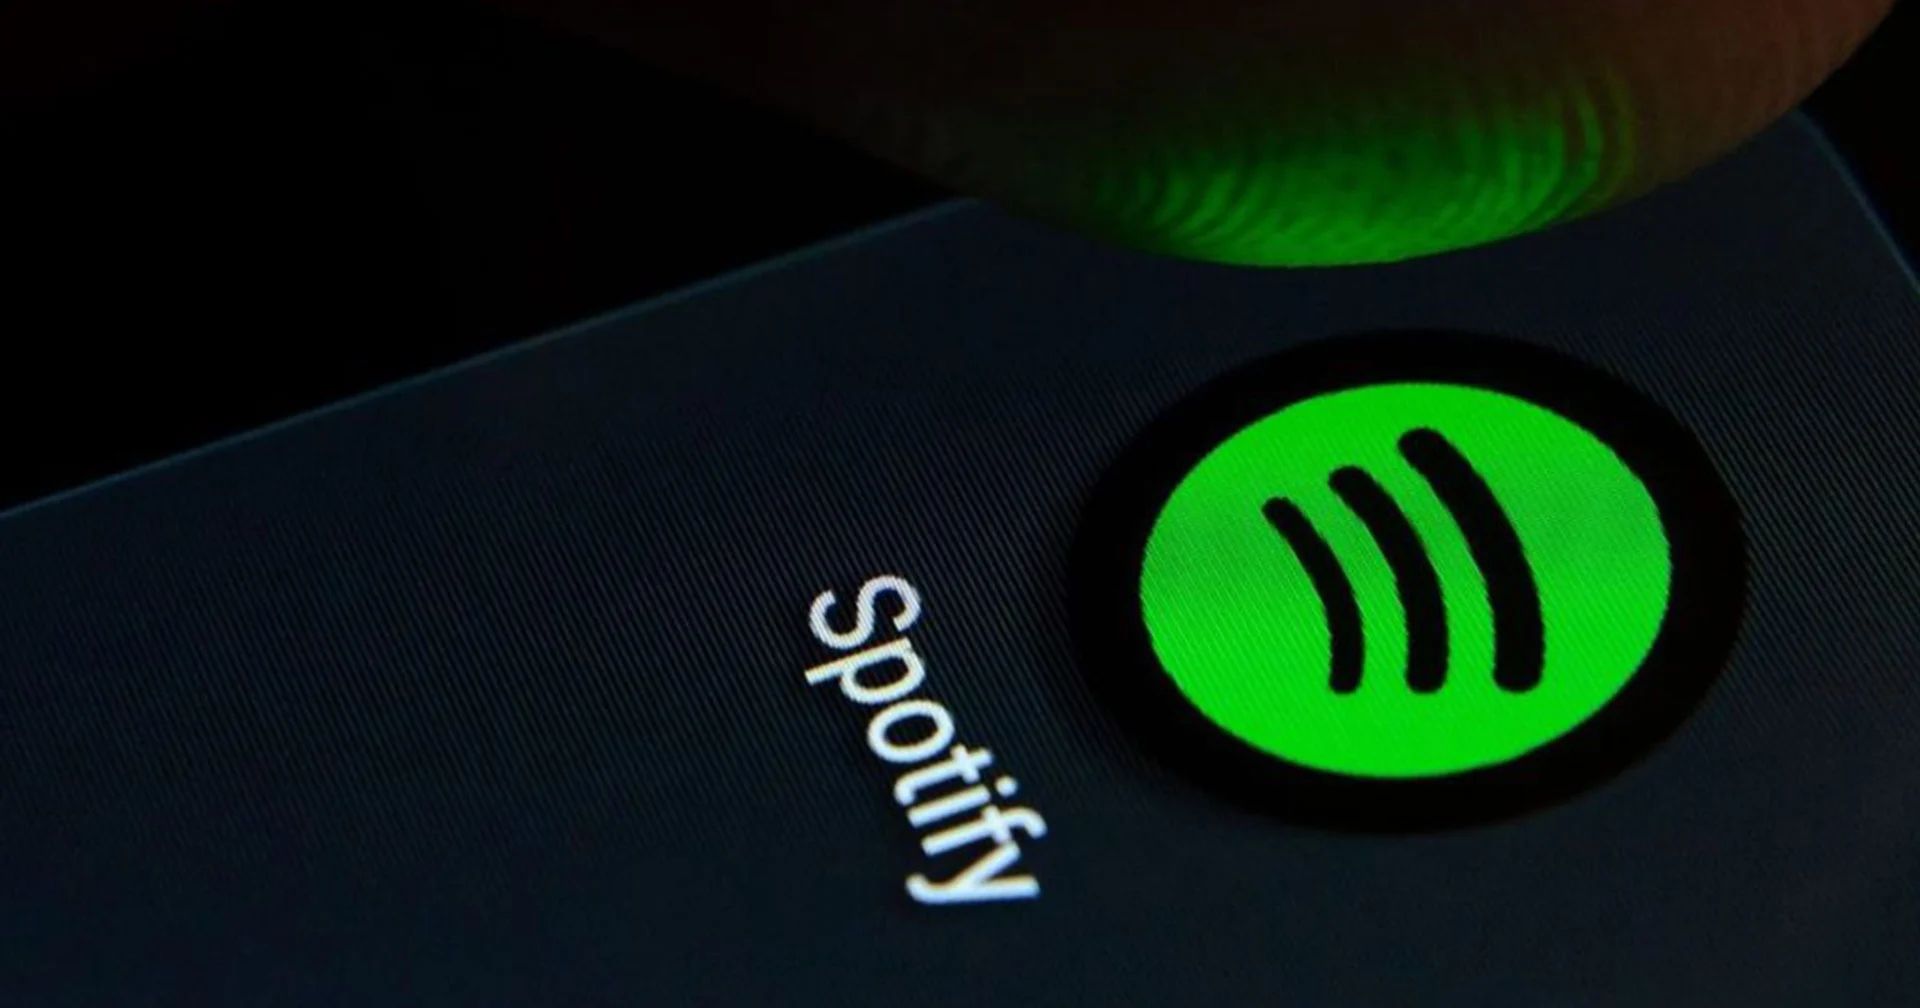 In this article, we are going to be covering how to delete playlist on Spotify, so you can get rid of old playlists and declutter your Spotify library.